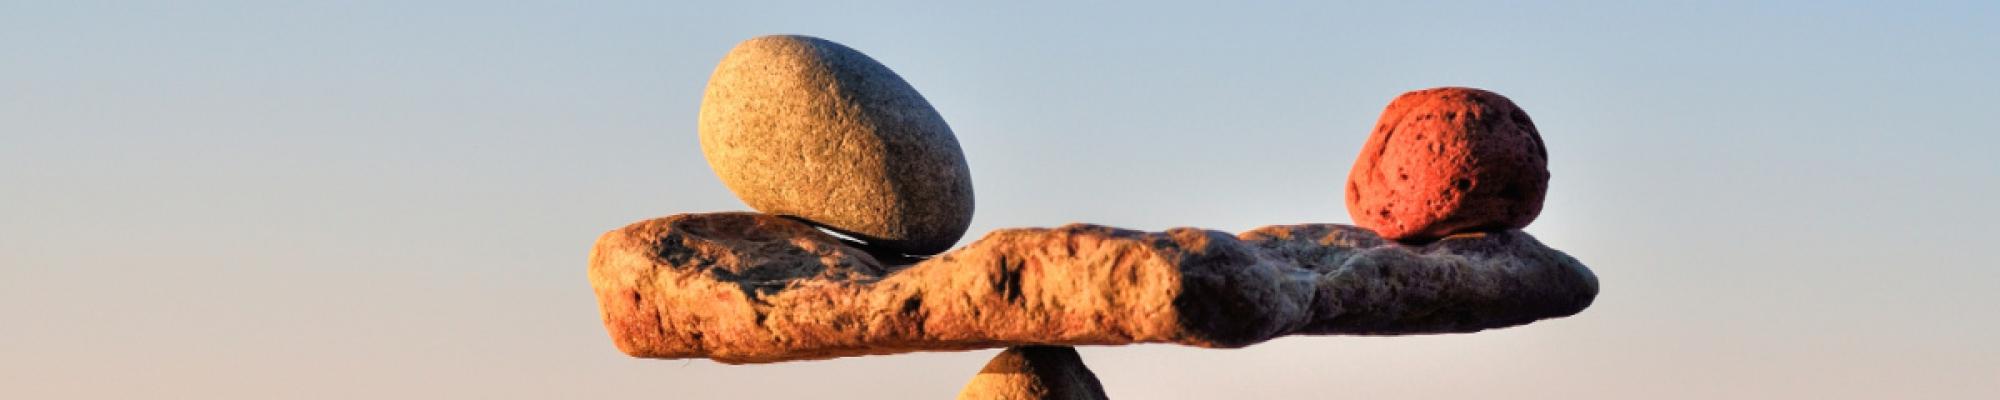 Image shows several rocks balancing on each other